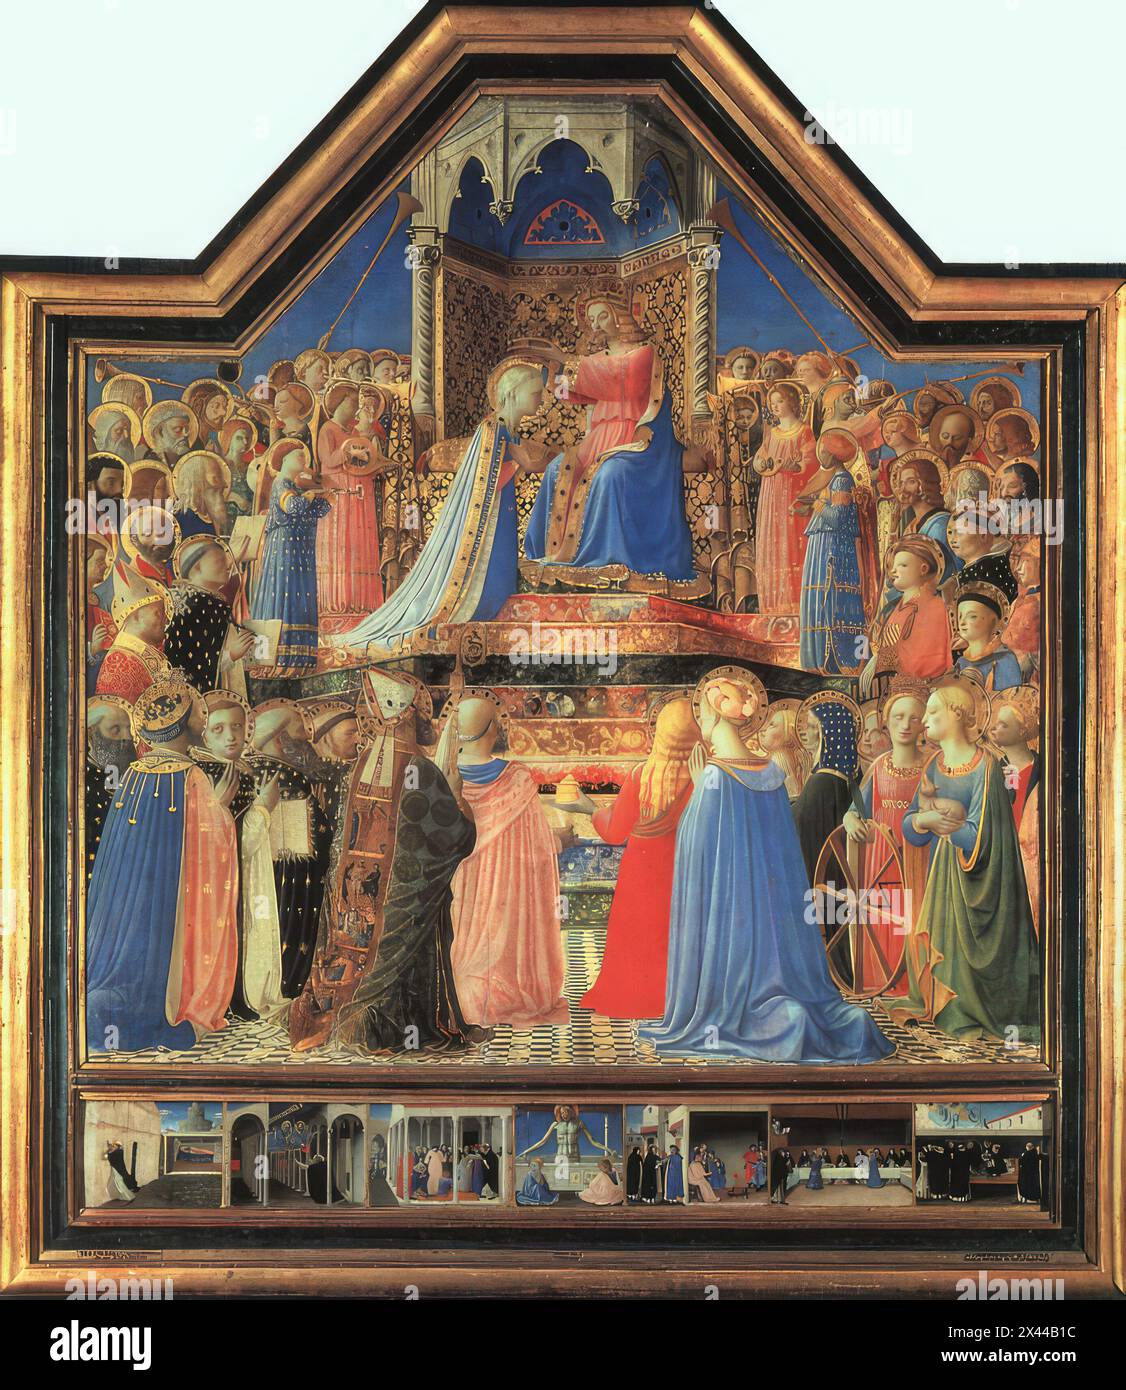 ANGELICO, Fra (b. ca. 1400, Vicchio nell Mugello, d. 1455, Roma)  Coronation of the Virgin 1434-35 Tempera on panel, 240 x 211 cm Musée du Louvre, Paris  This altarpiece, exhibited now in the Musée du Louvre together with its seven predella pictures, was executed for the church San Domenico in Fiesole is one of the most famous of Fra Angelico's works. It is a good example of the painter's art of tempera painting with fresh colours that have not changed. On the predella the story of San Domenico is depicted.        *** Keywords: *************  Author: ANGELICO, Fra Title: Coronation of the Virg Stock Photo